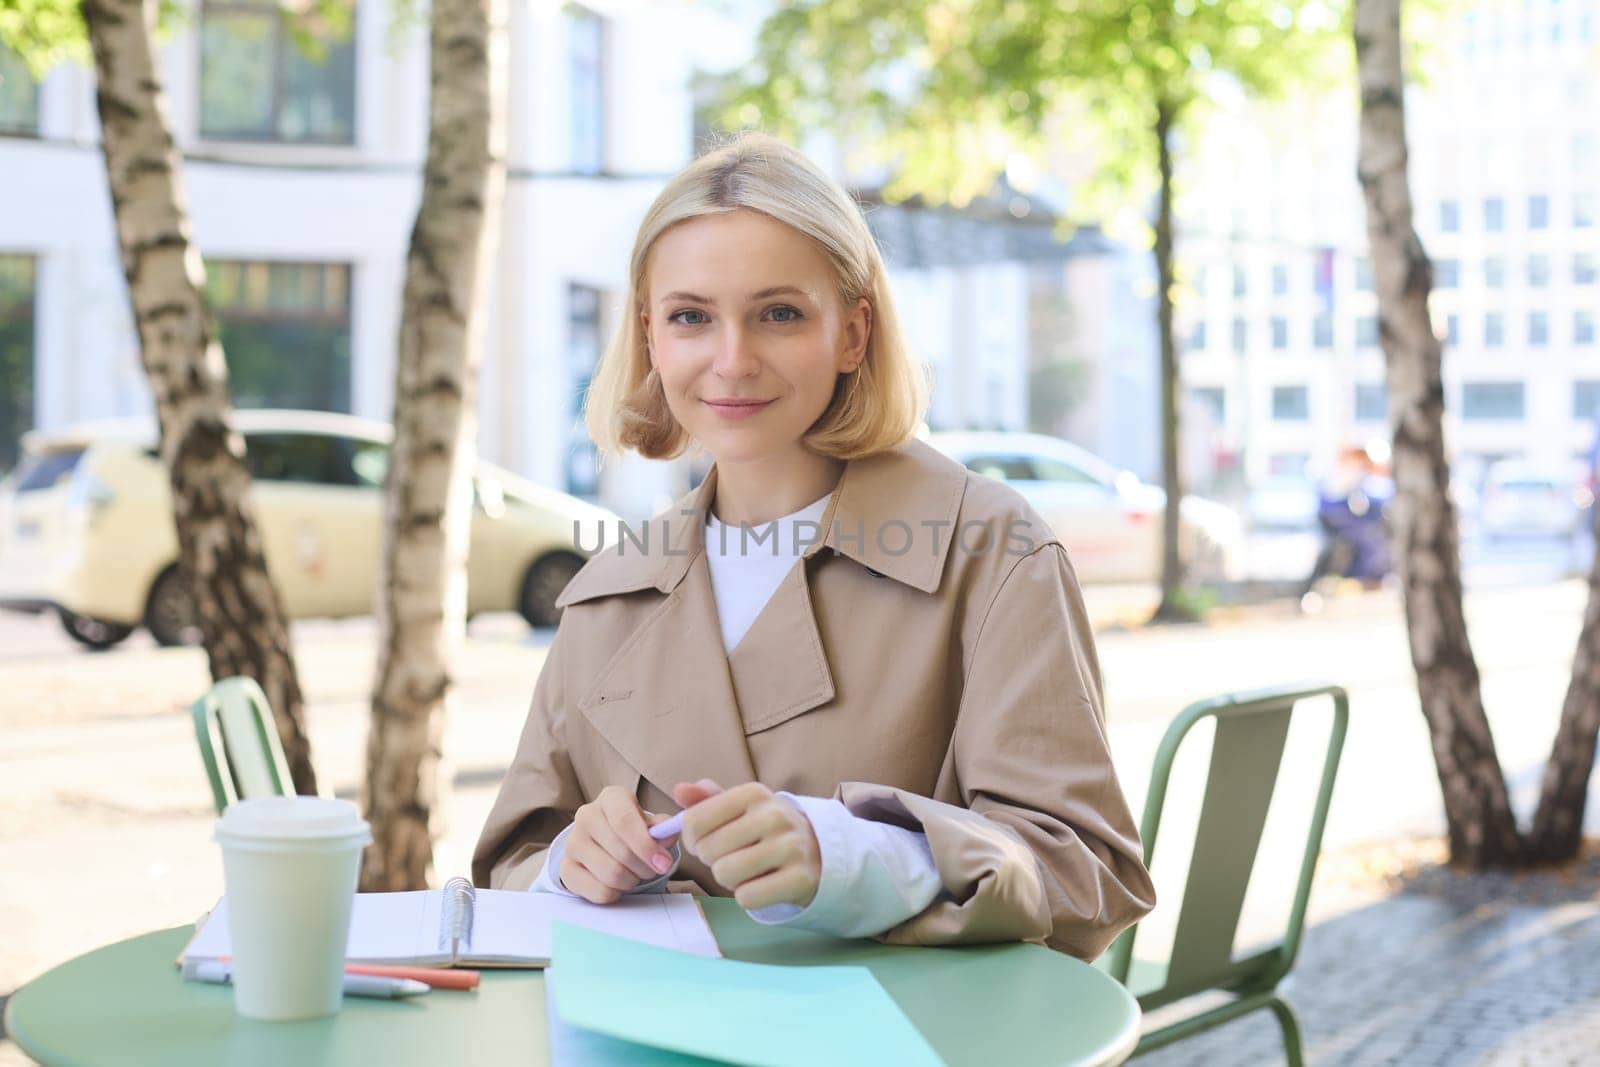 Portrait of young stylish student, woman working outdoors in cafe, doing homework, writing essay, holding markers, smiling at camera.